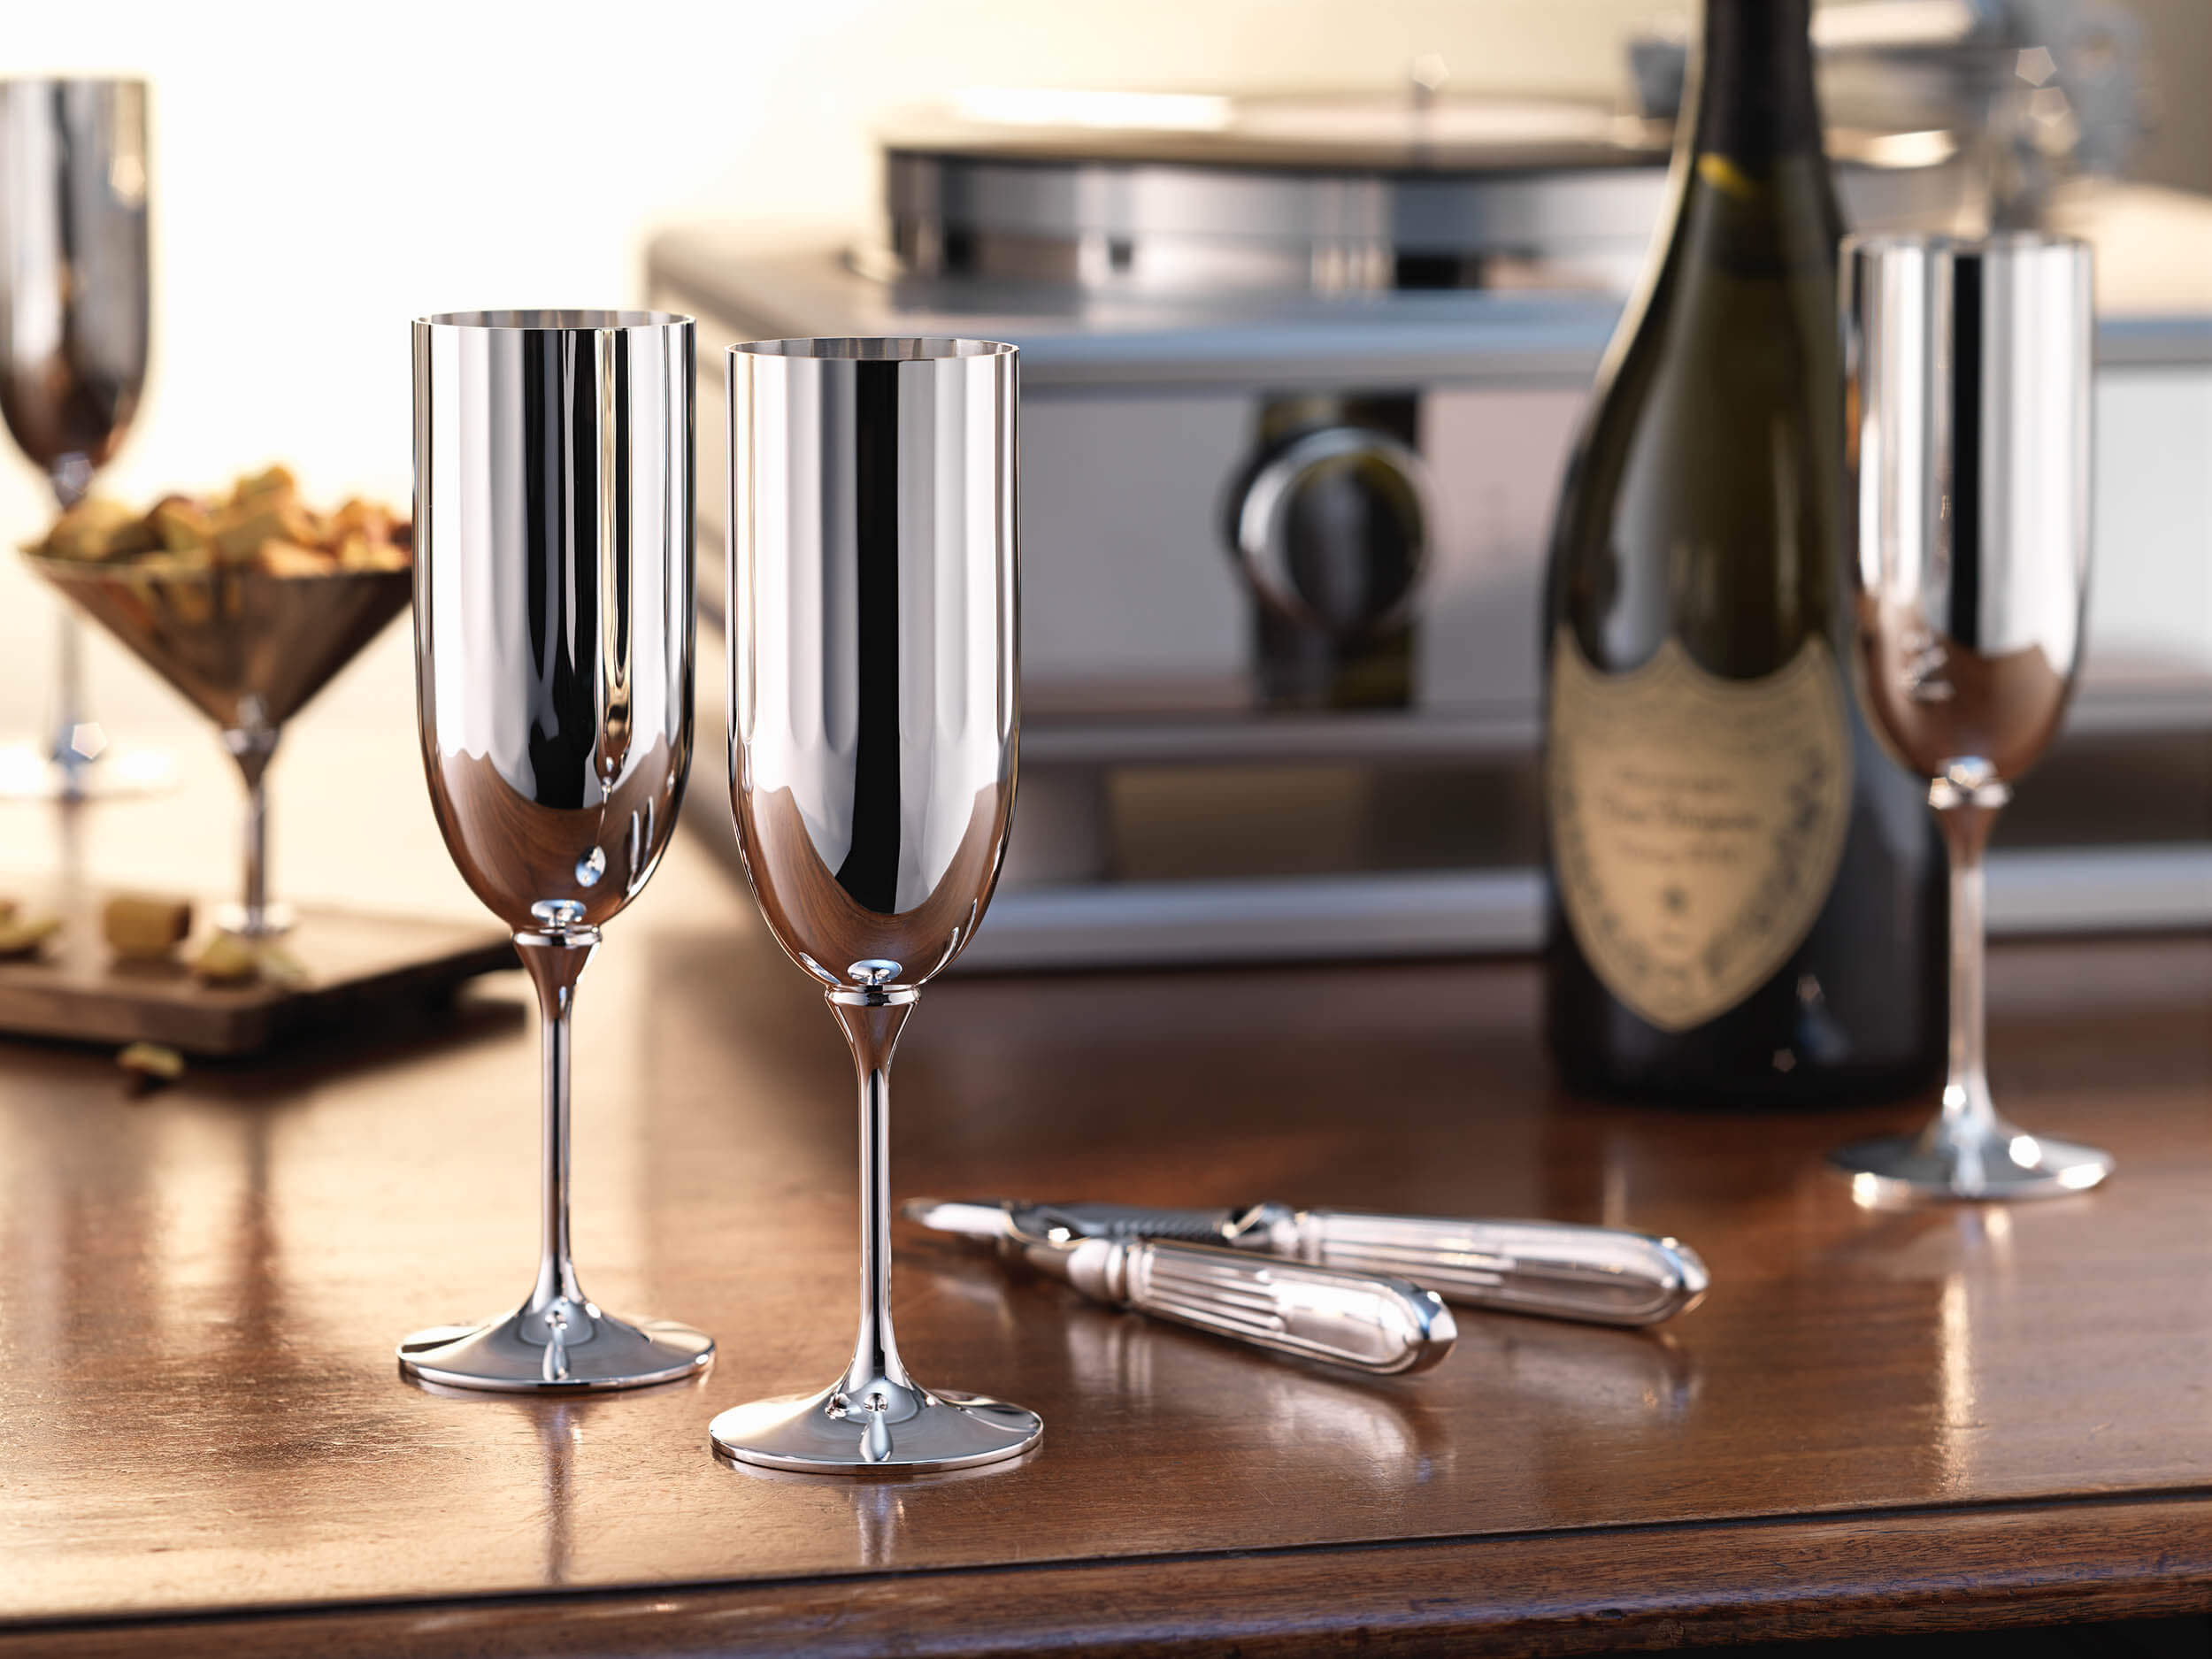 Robbe & Berking Champagne Flute